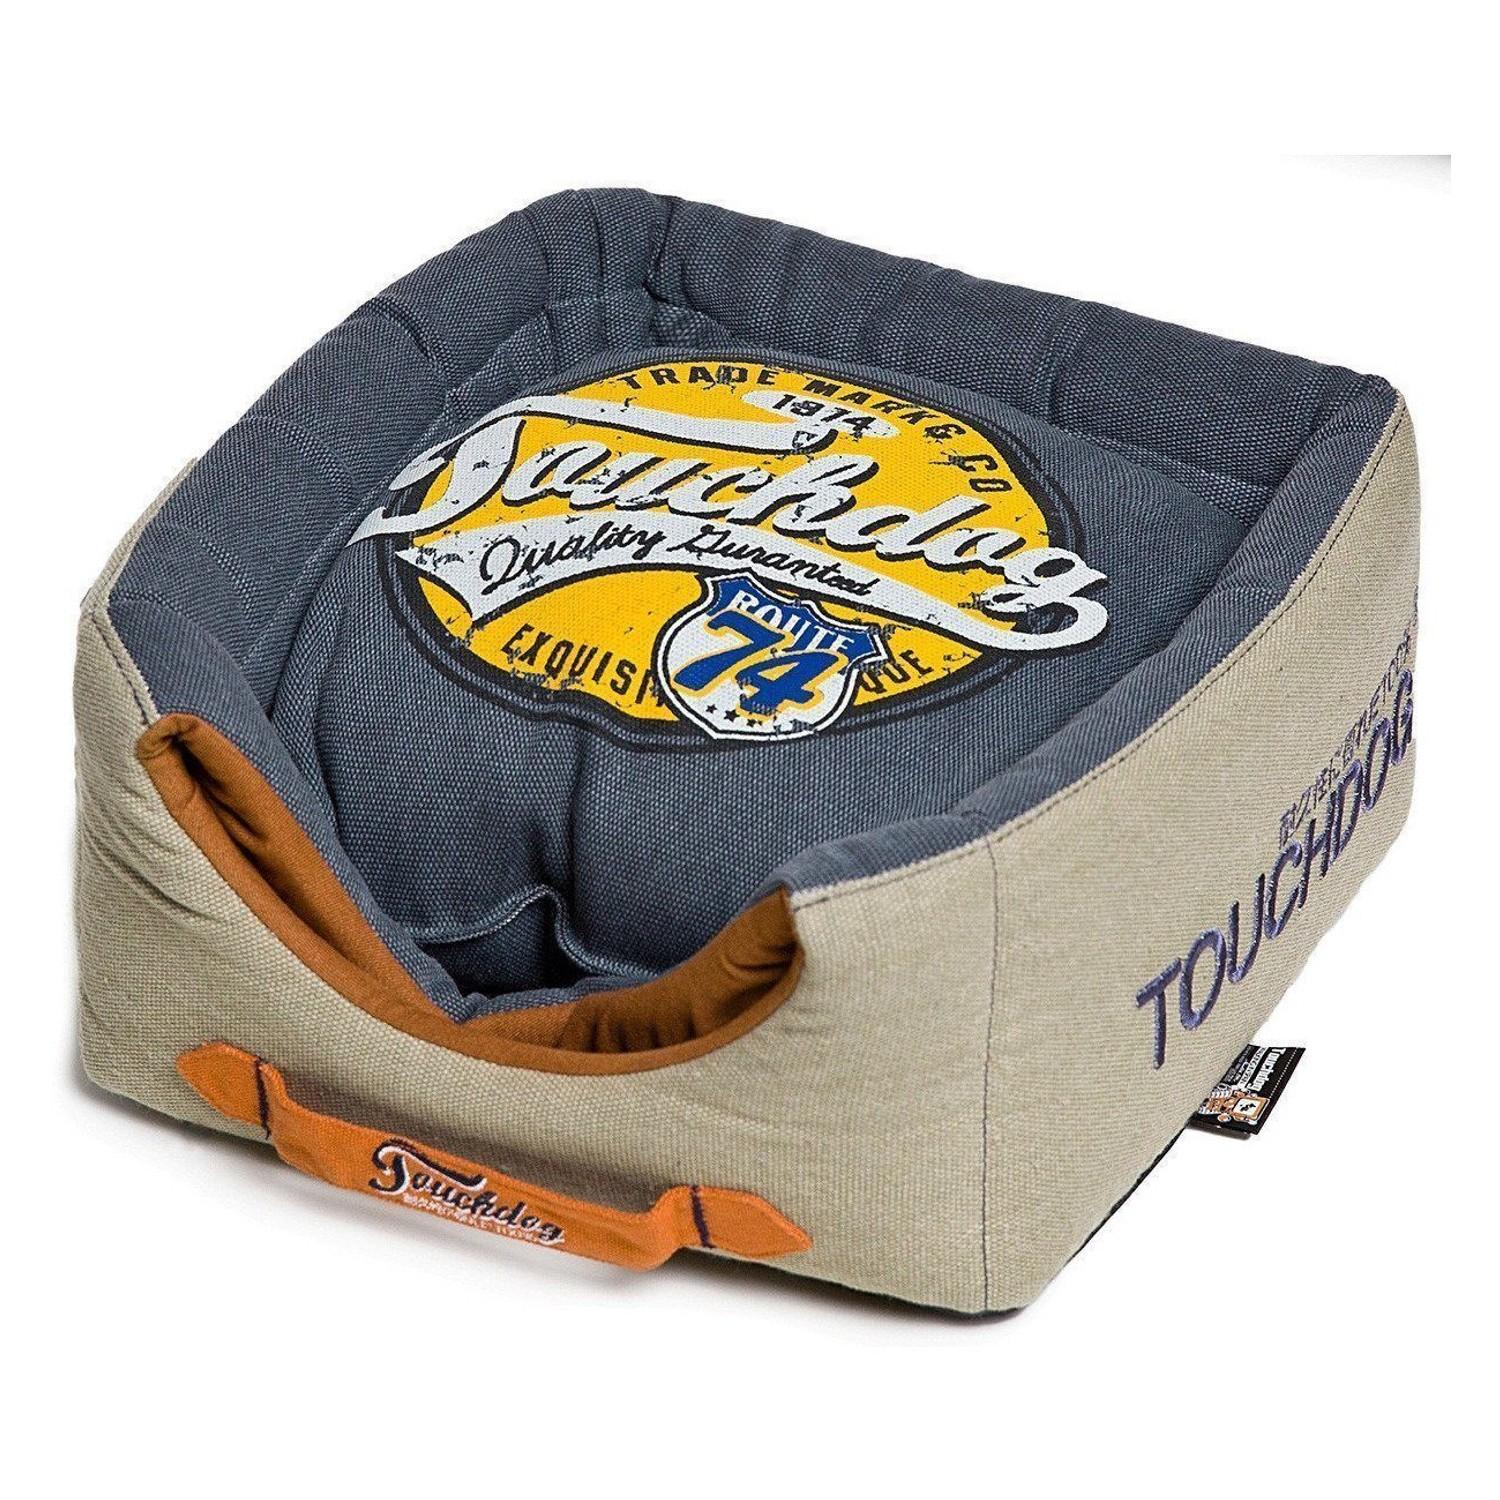 Pet Life Touchdog Vintage Squared 2-in-1 Collapsible Dog and Cat Bed - Navy Blue, Beige